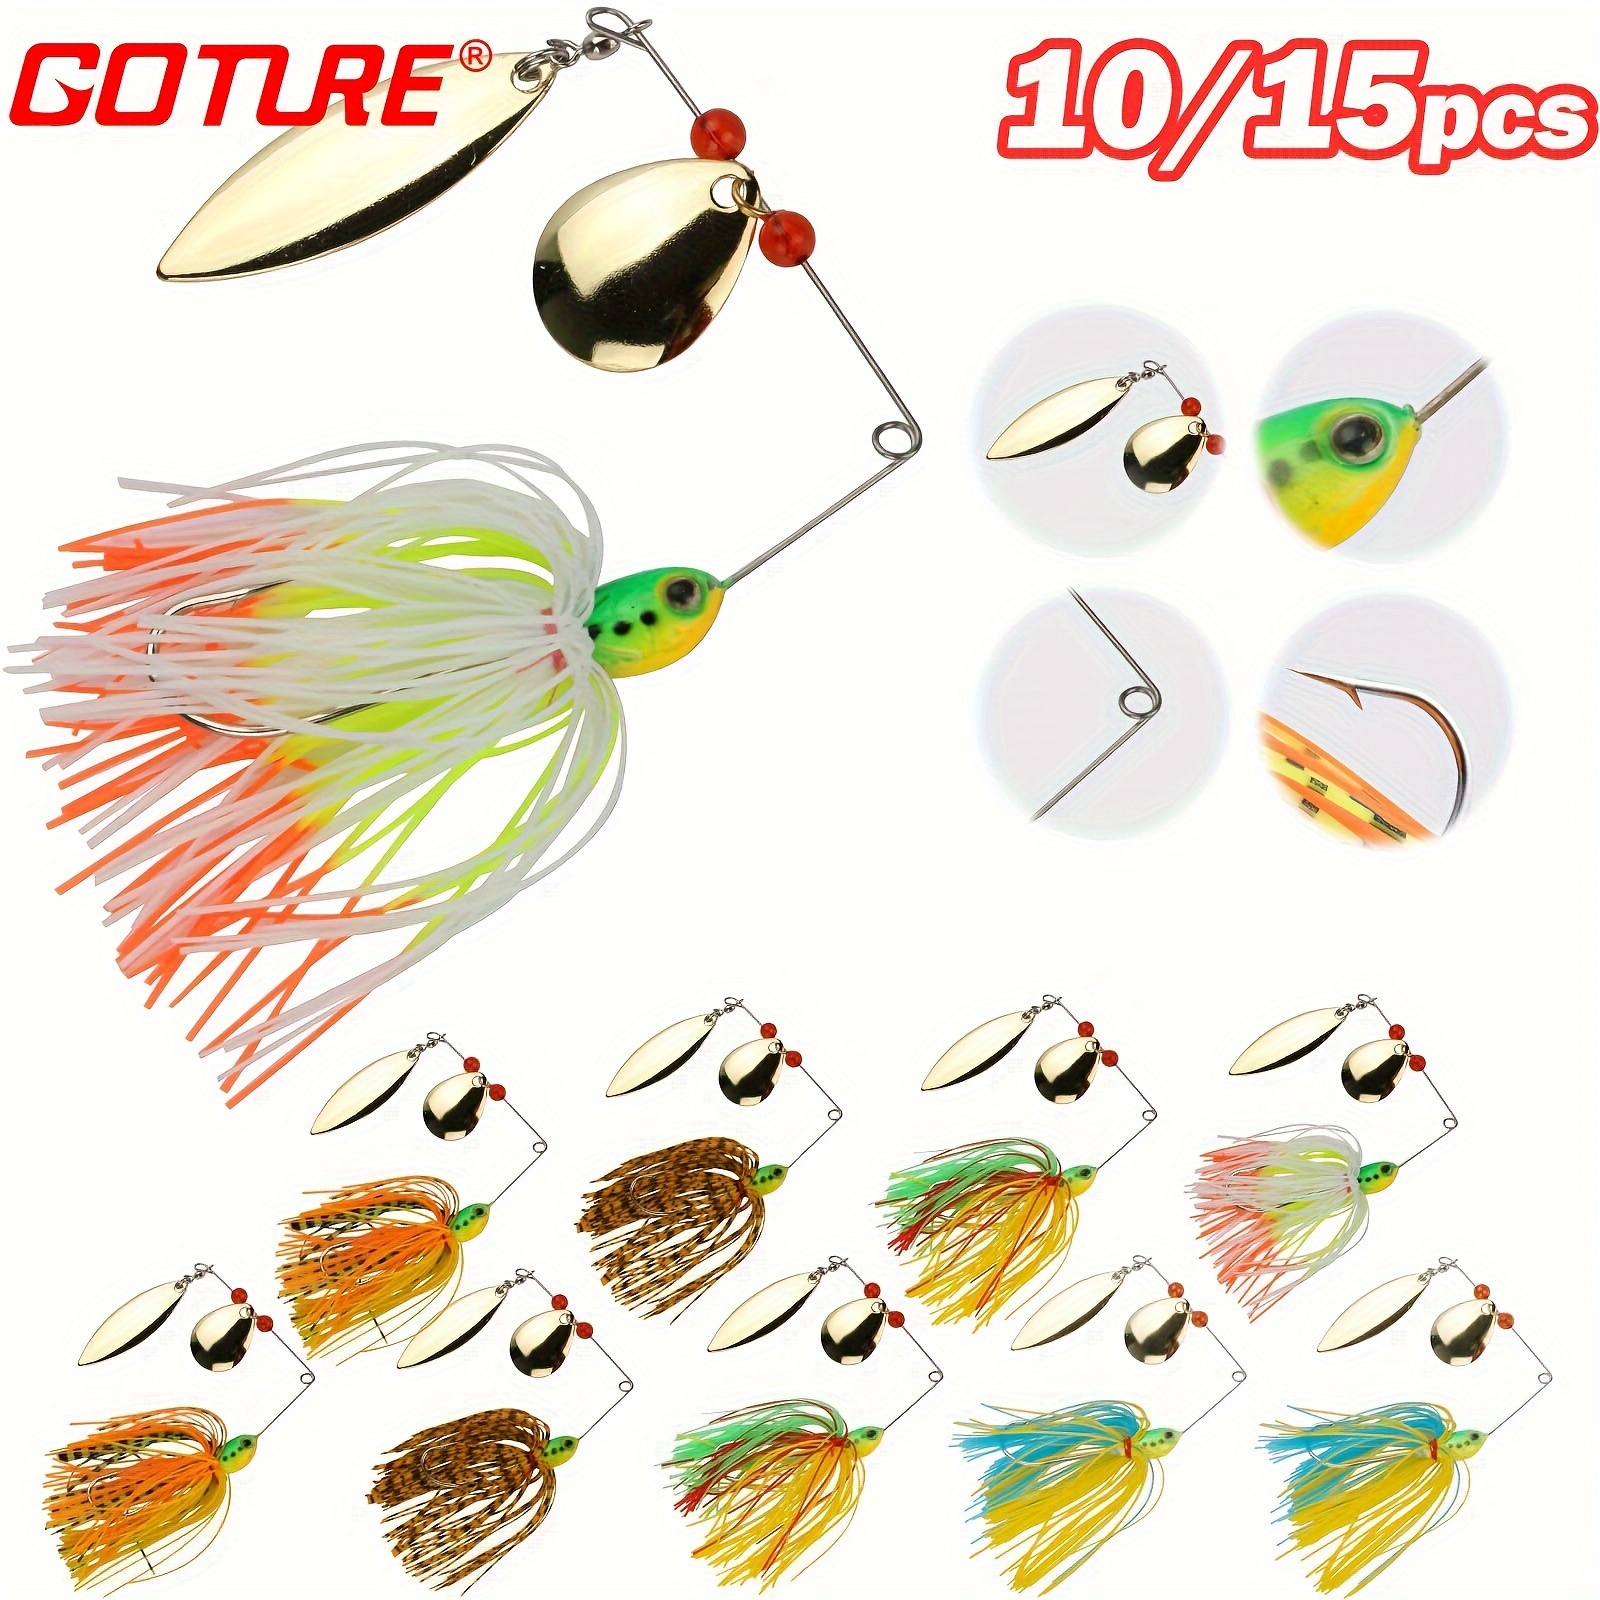 

Goture 10/15pcs Bass Fishing Lure, Spinner Baits Kit, Topwater Fishing Lure, Fishing Accessories For Saltwater Freshwater